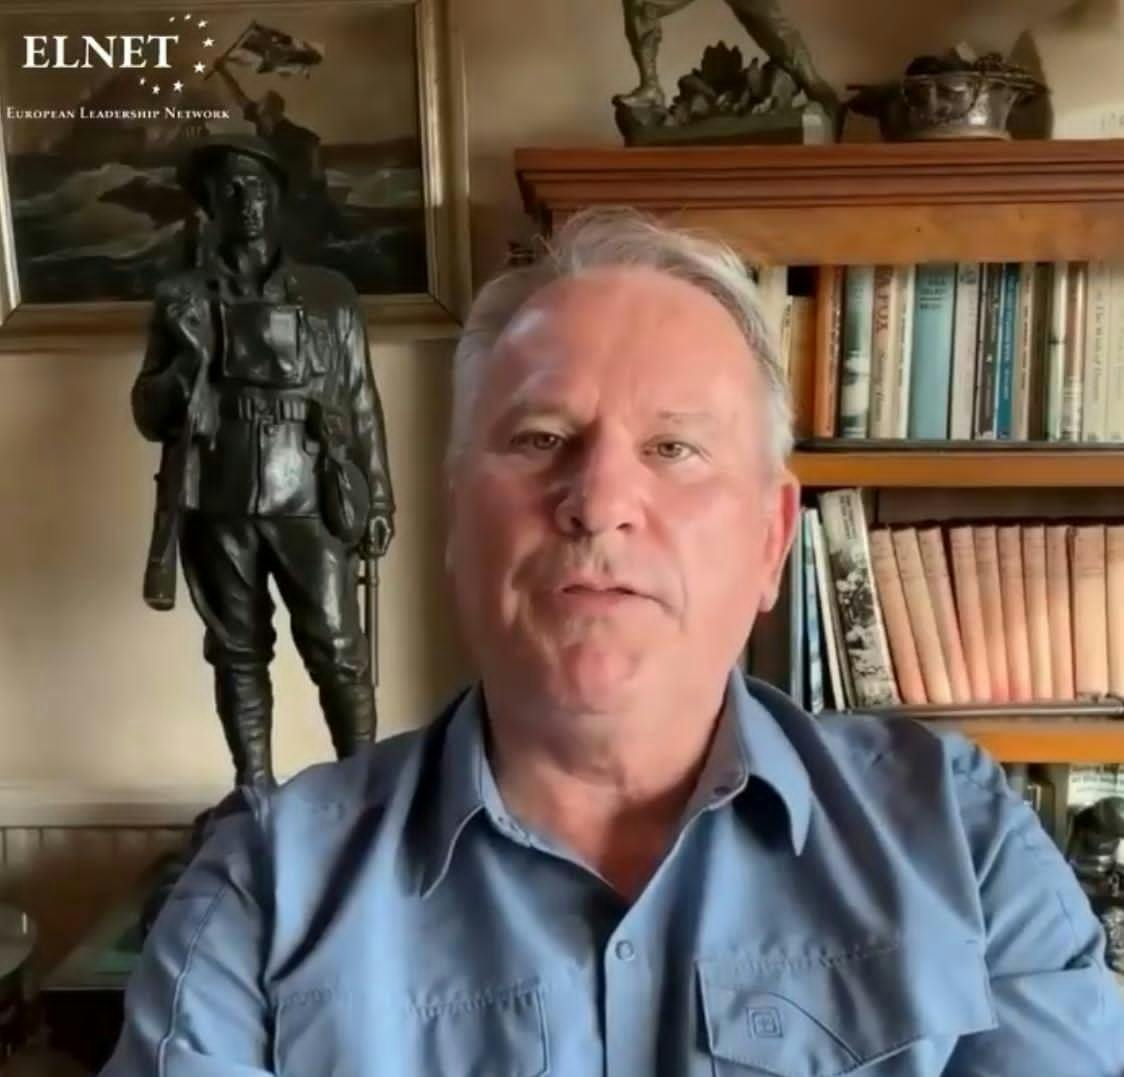 141: Col. Richard Kemp: "The UN, US and UK just threw the Israeli hostages under the bus"